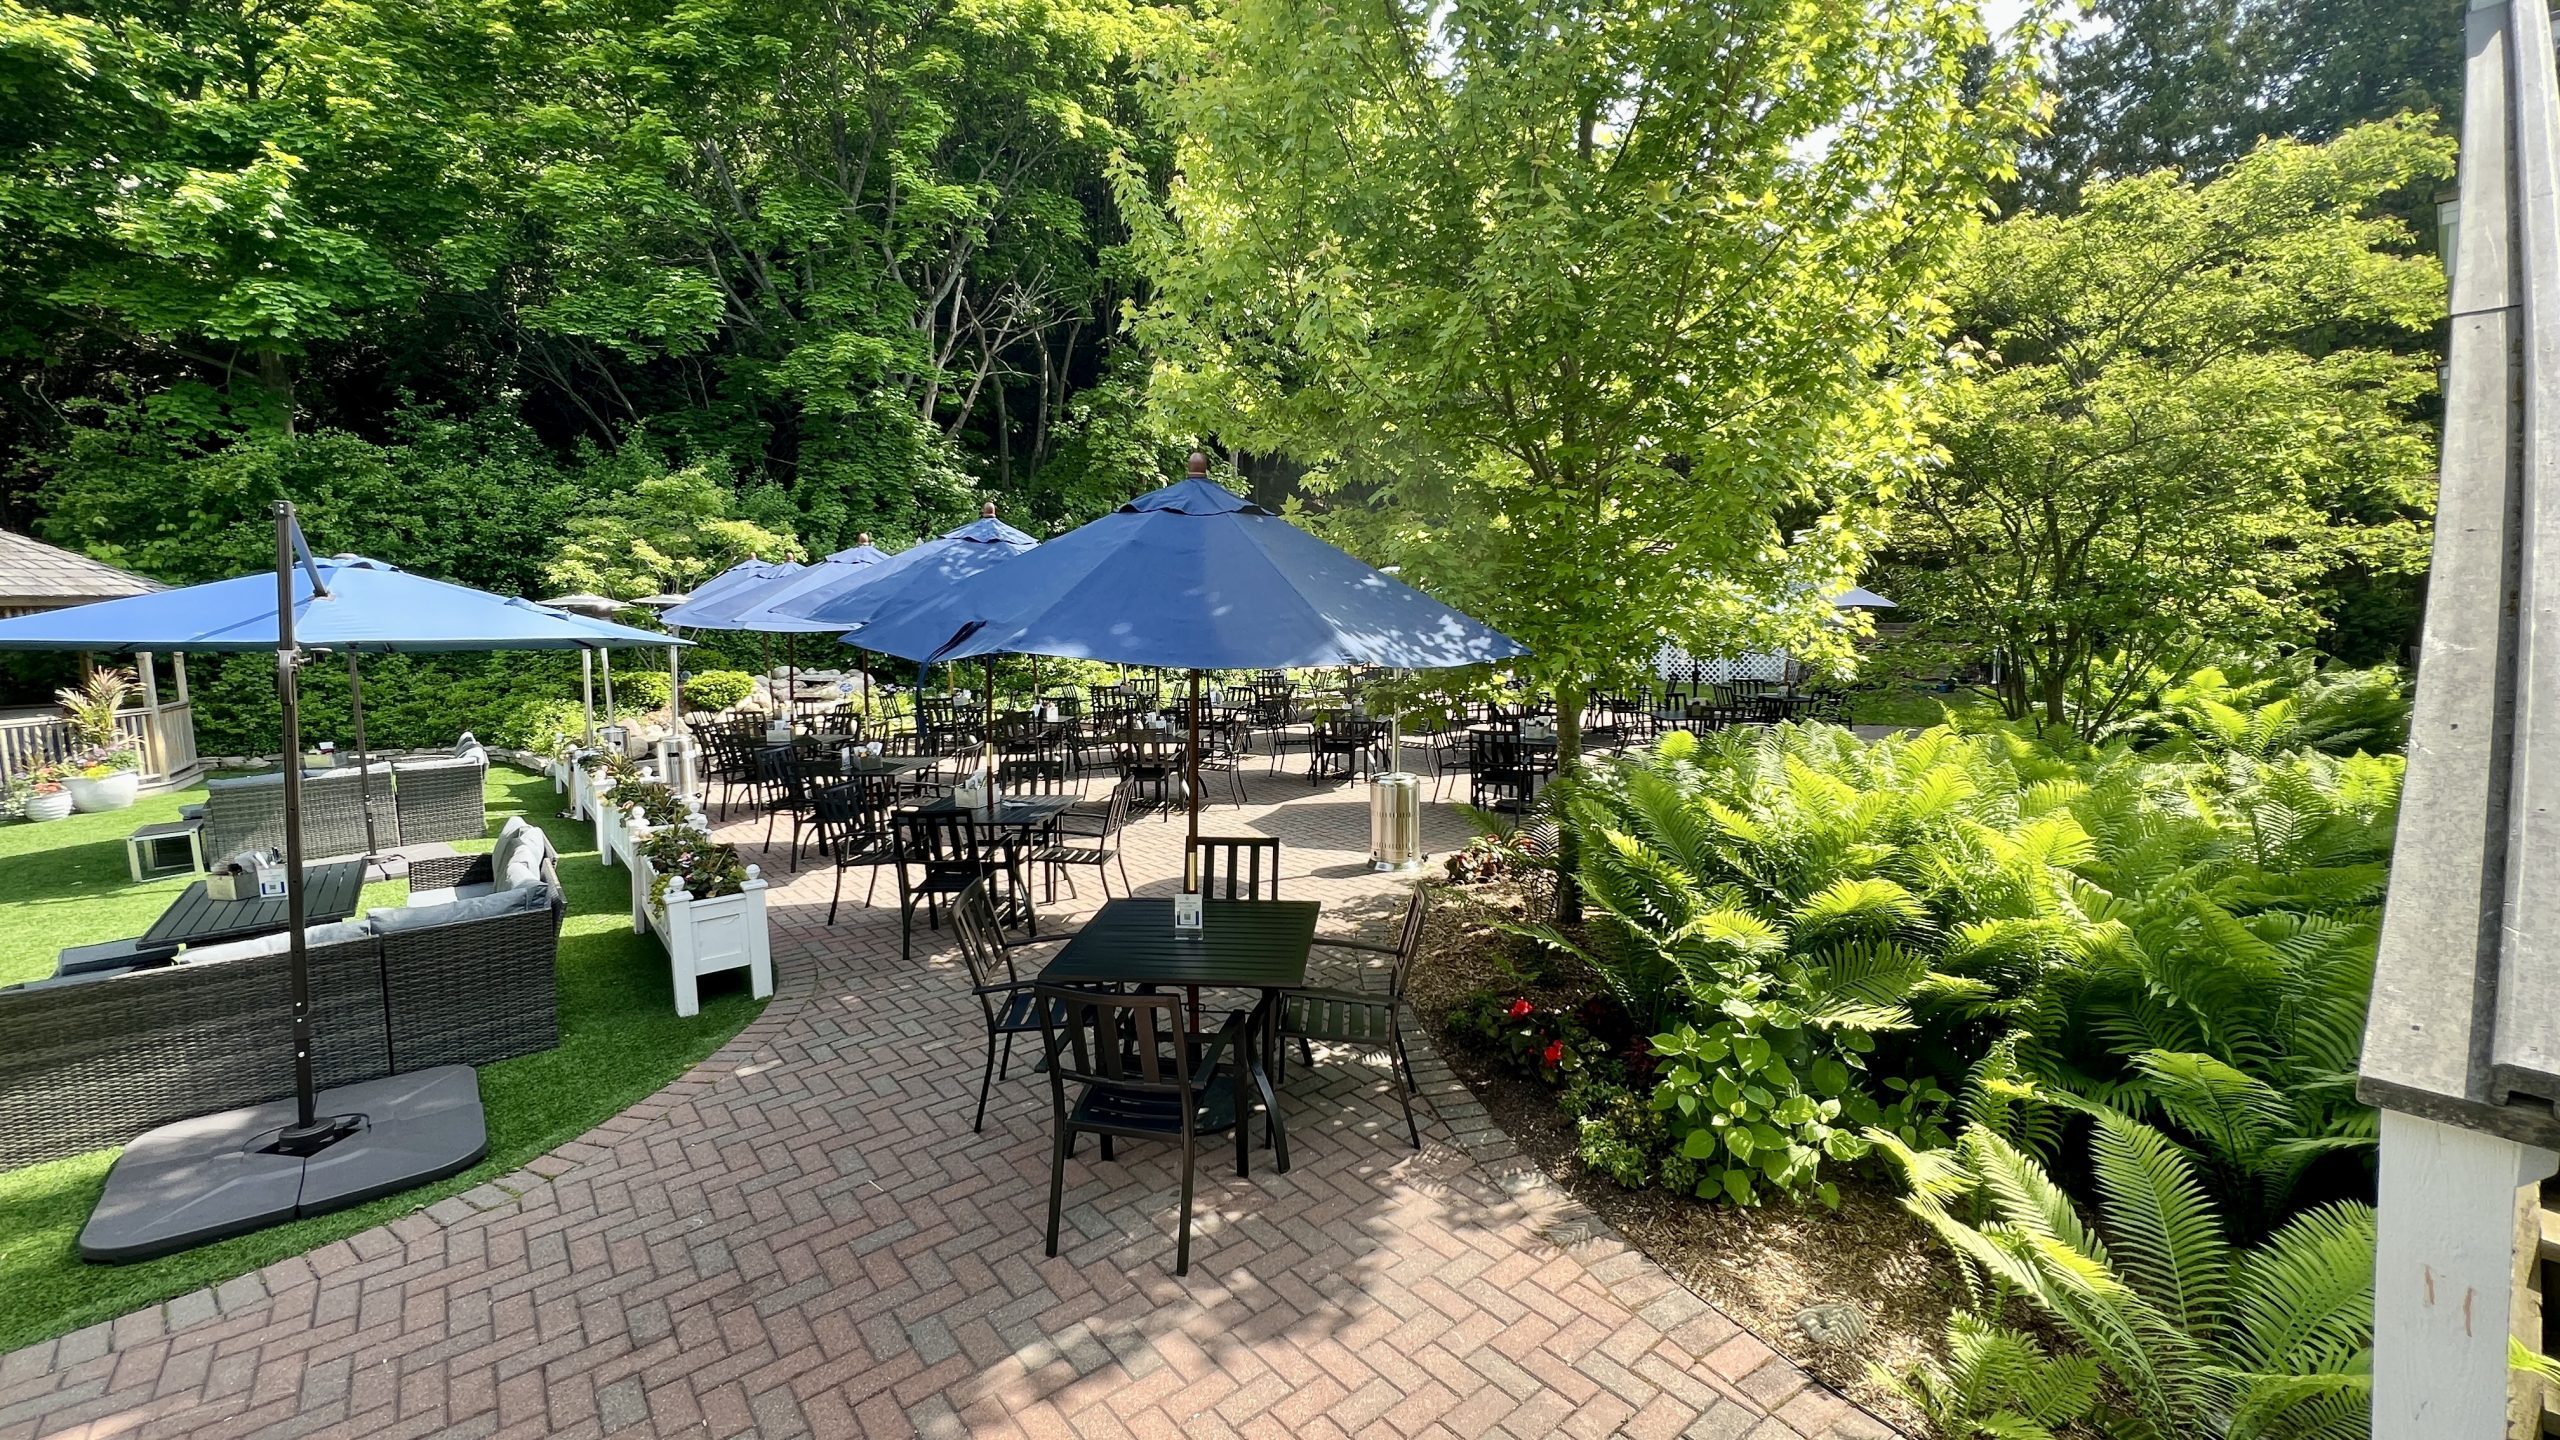 The outdoor garden at Ice House BBQ on Mackinac Island is a beautiful place for lawn games, food and drink.